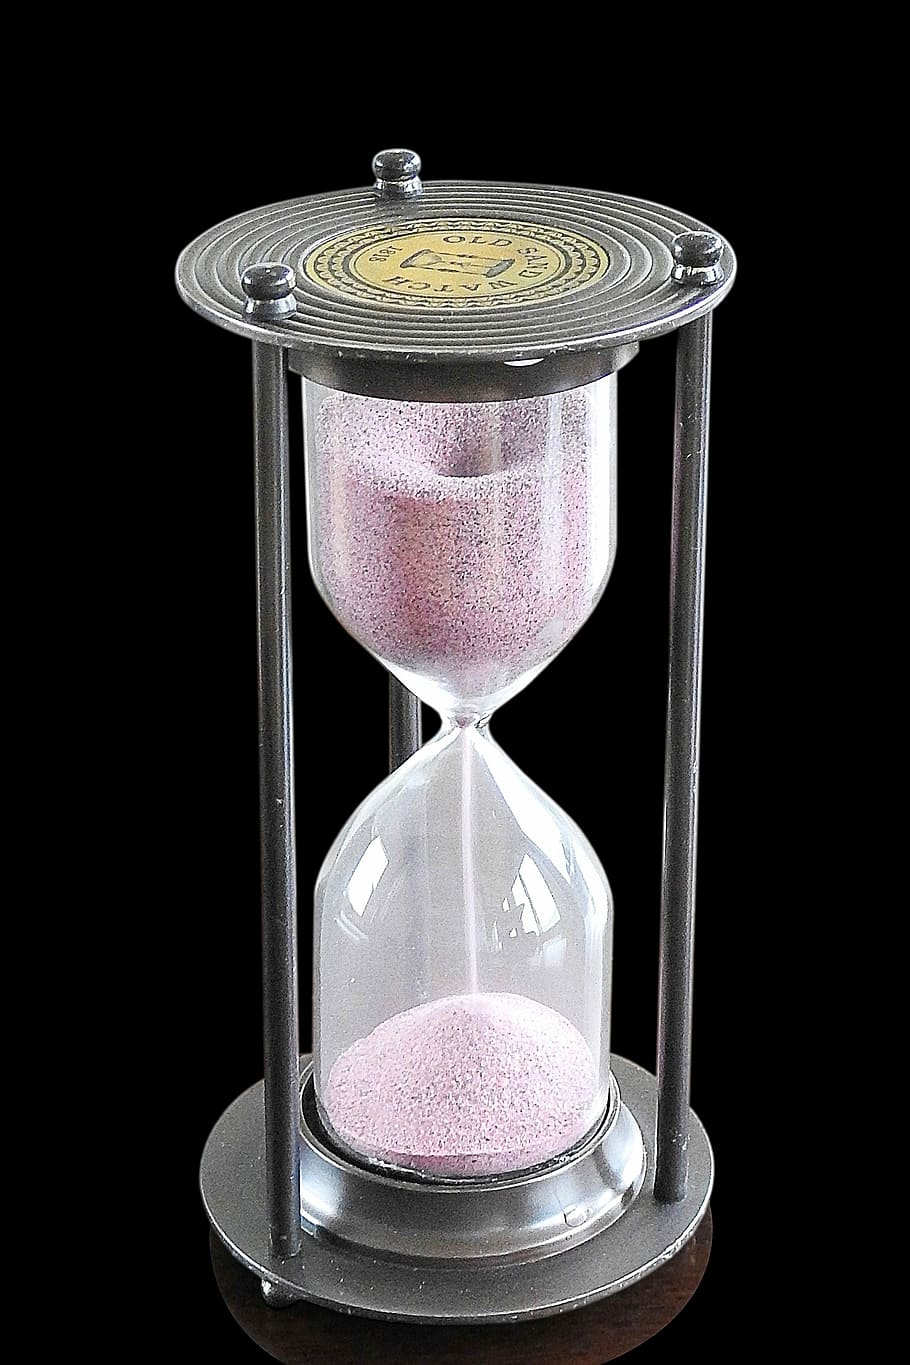 Hourglass, Timepiece, Sand, Time, run out, black background, indoors, studio shot, still life, glass - material